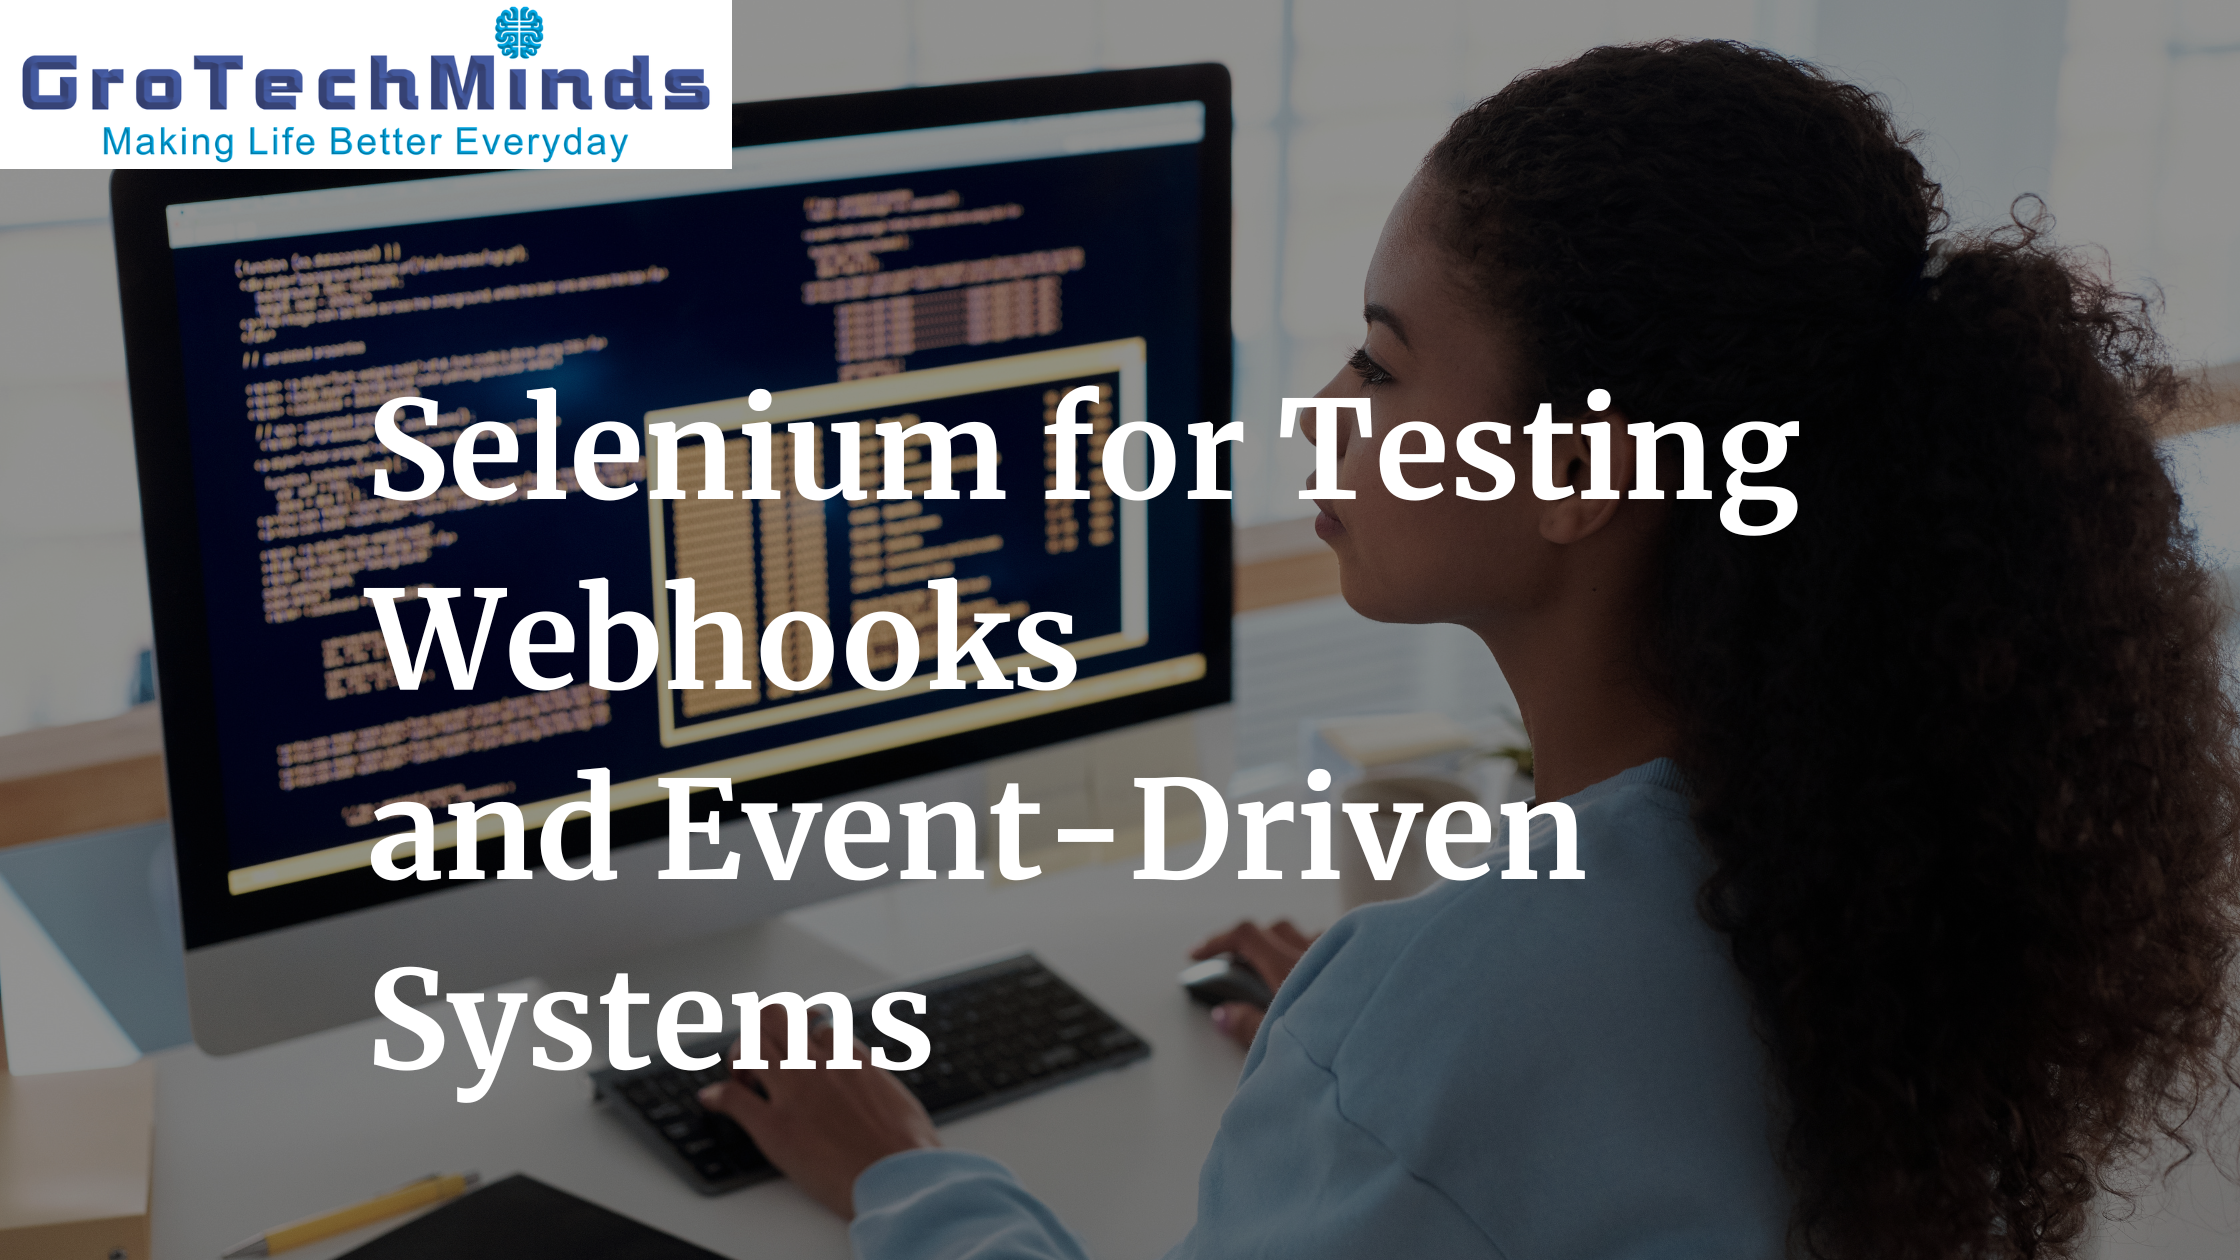 Selenium for Testing Webhooks and Event-Driven Systems